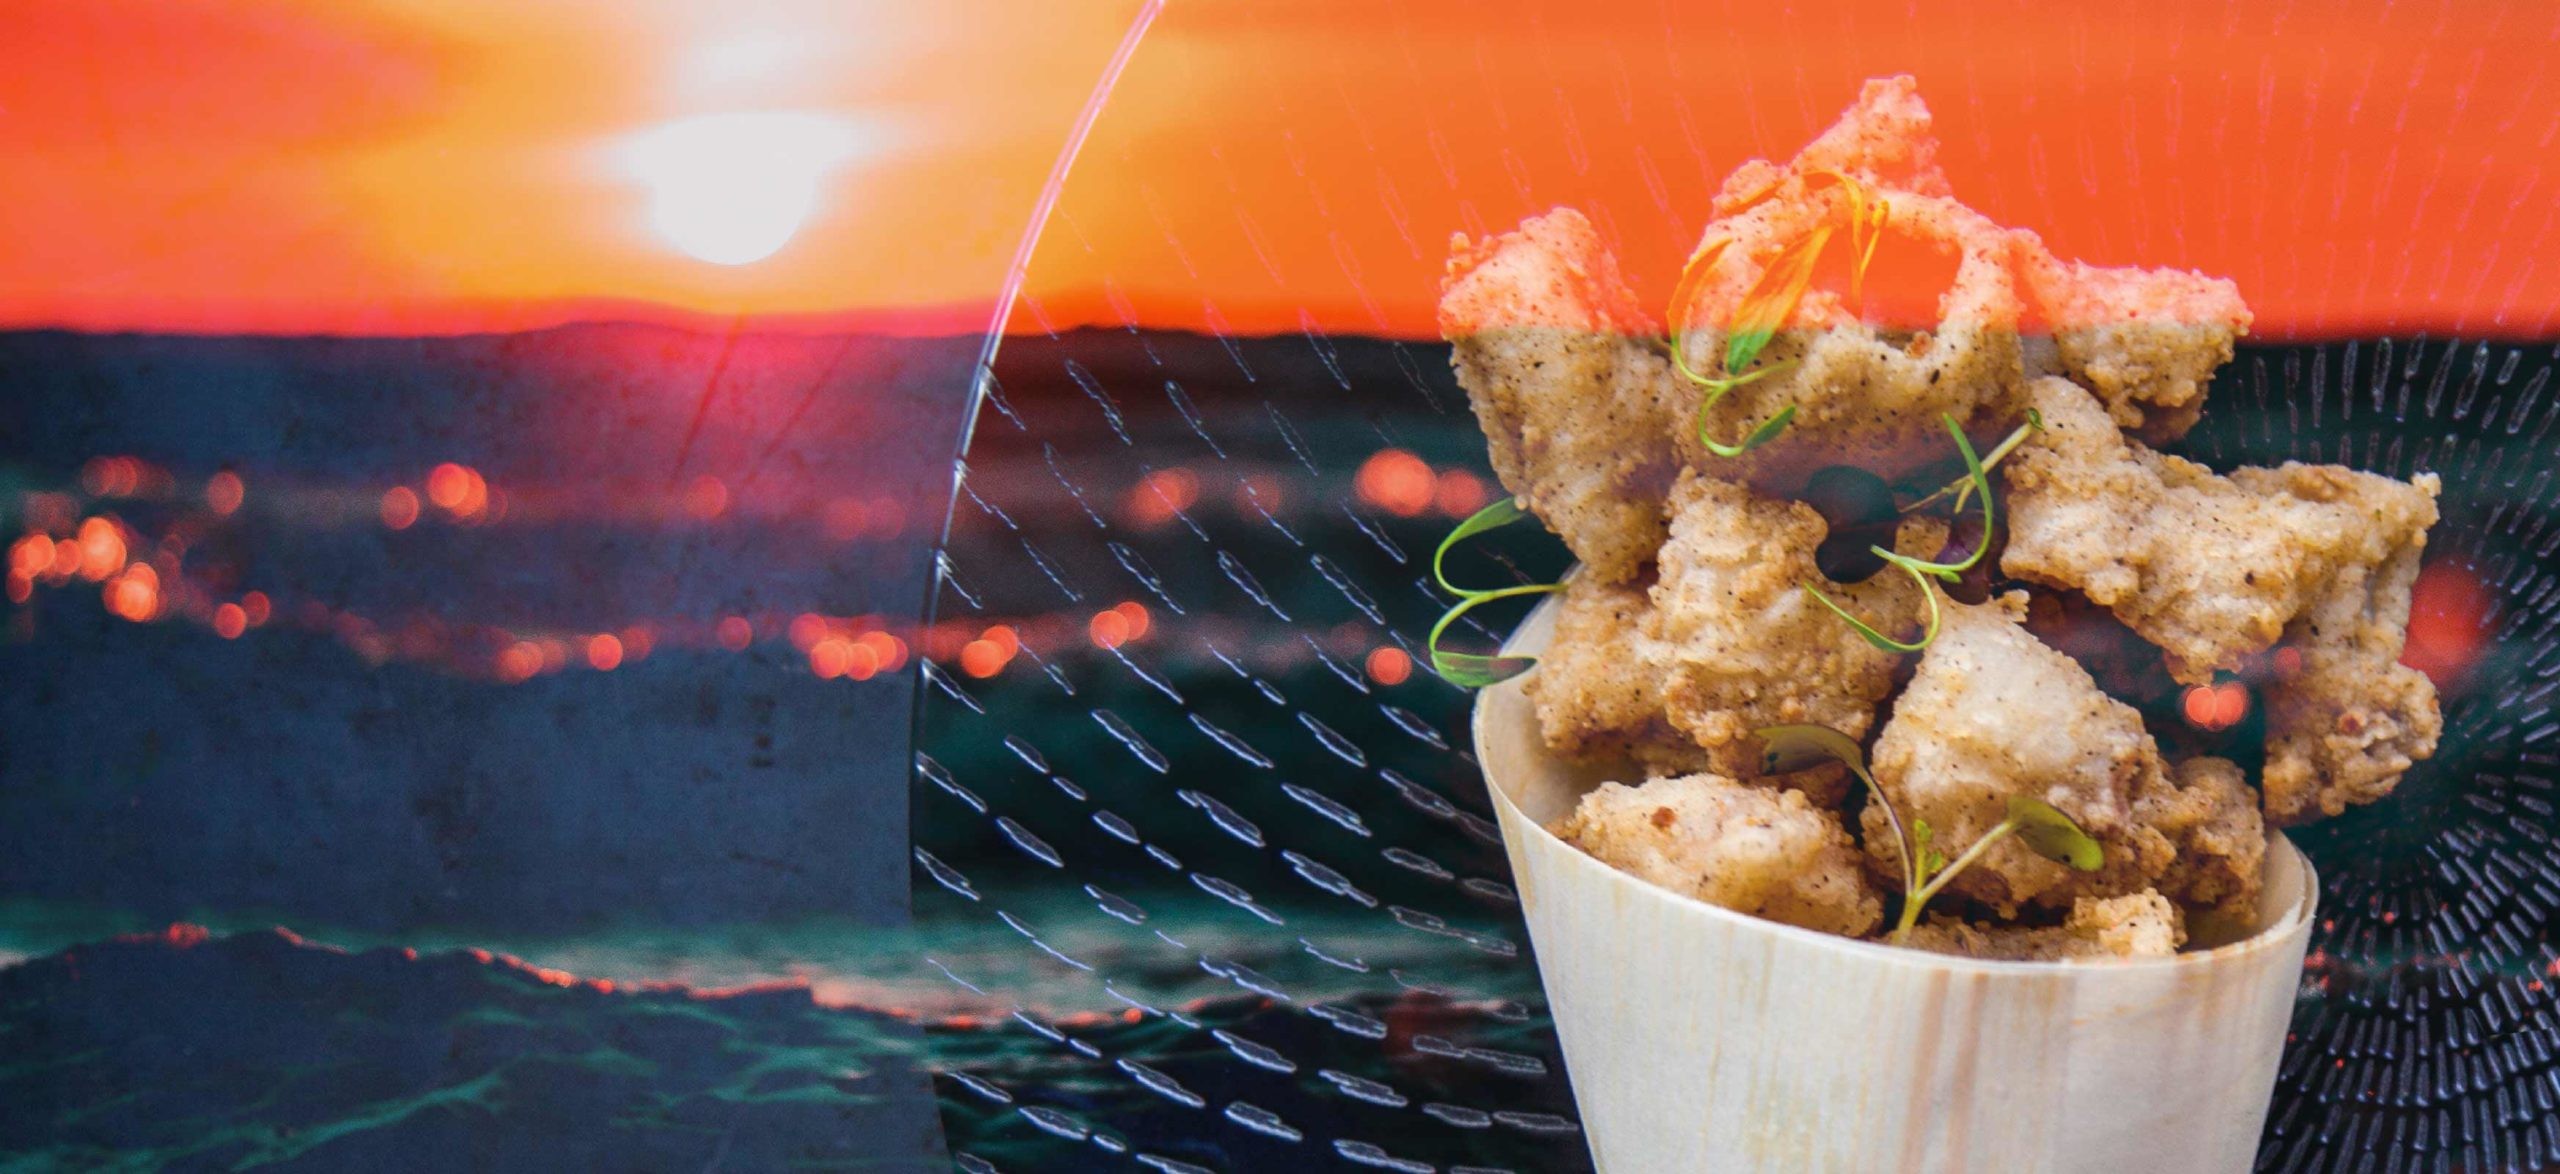 A photo of fried calamari with the ocean and sun in the background